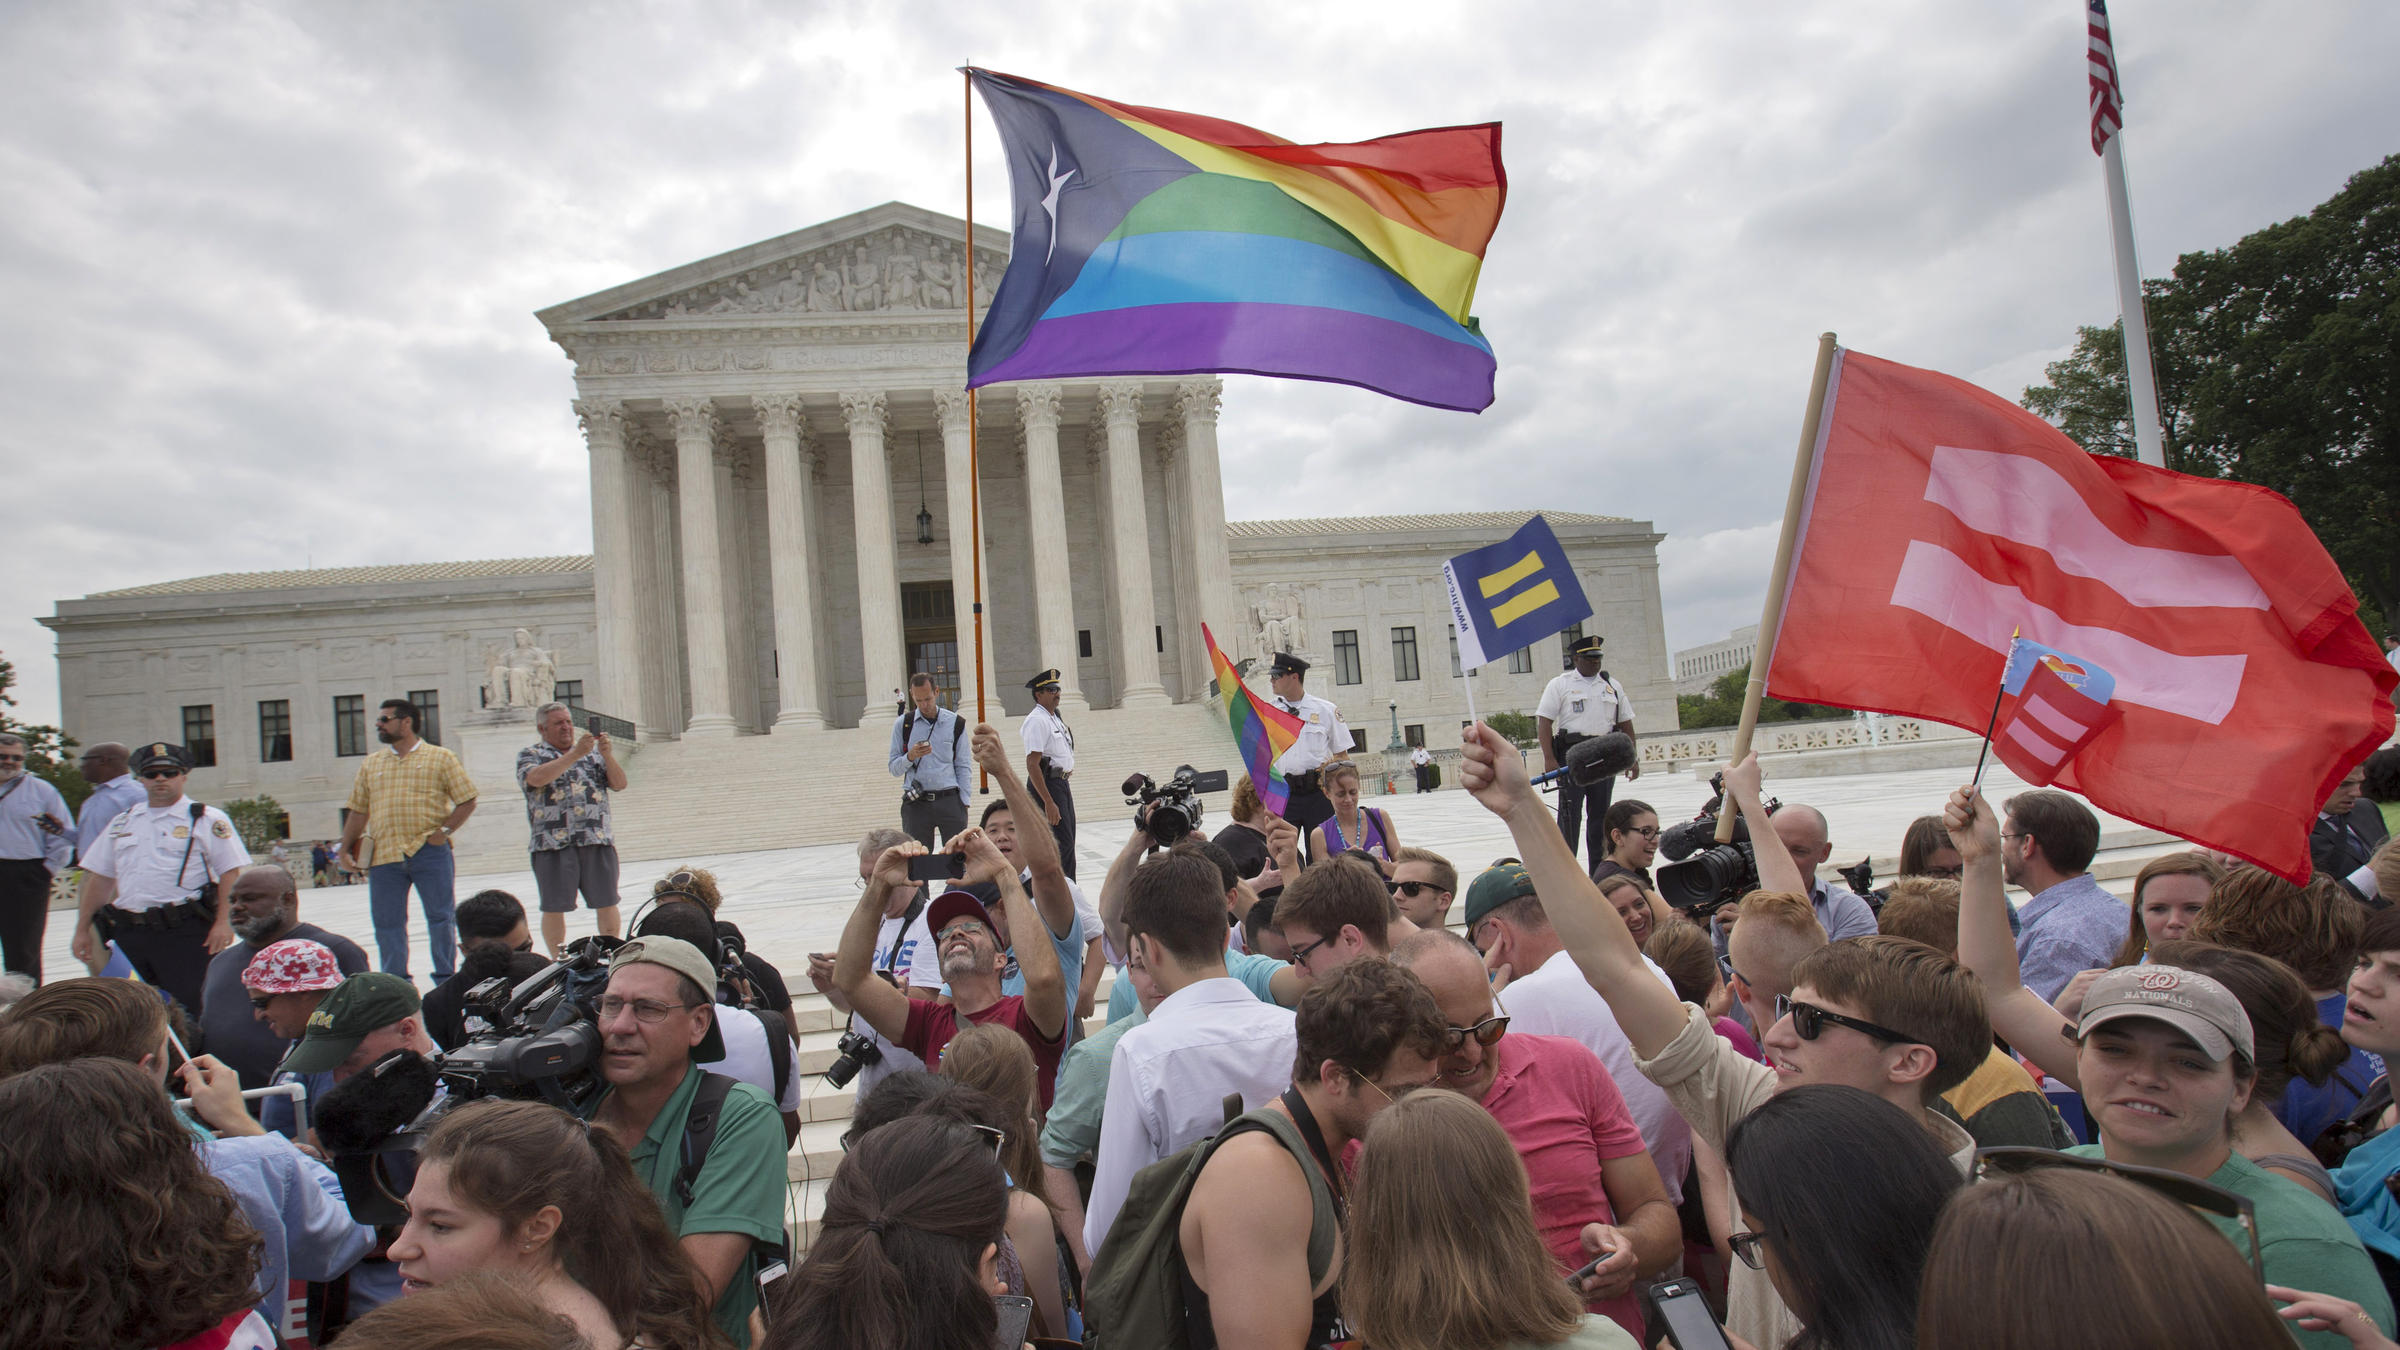 Supreme Court S Decision On Same Sex Marriage Expected To Boost Health Coverage Wjct News